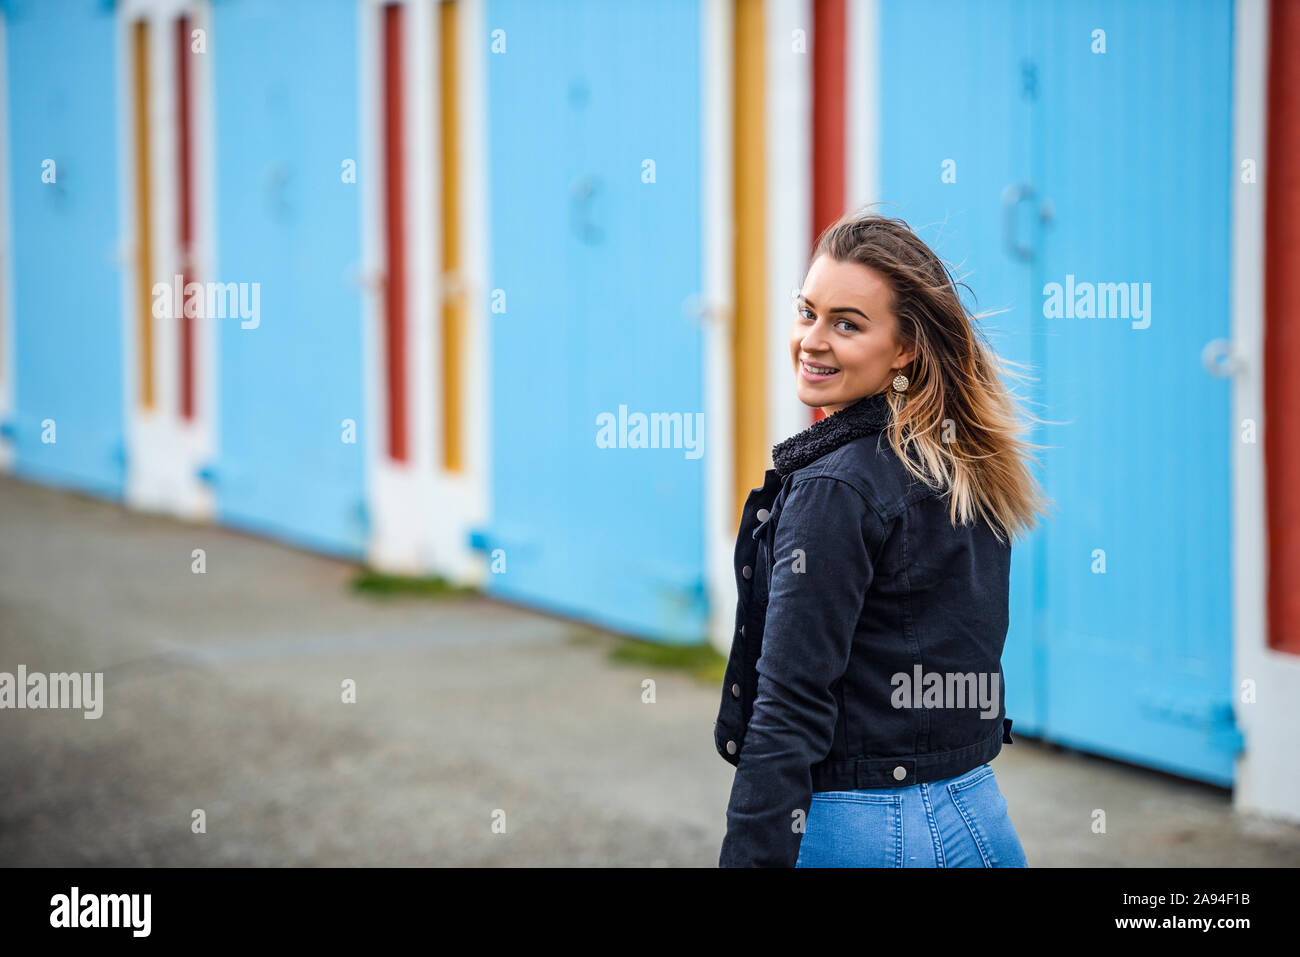 A young woman walks down the street along a colourful building, looking back over her shoulder at the camera; Wellington, North Island, New Zealand Stock Photo